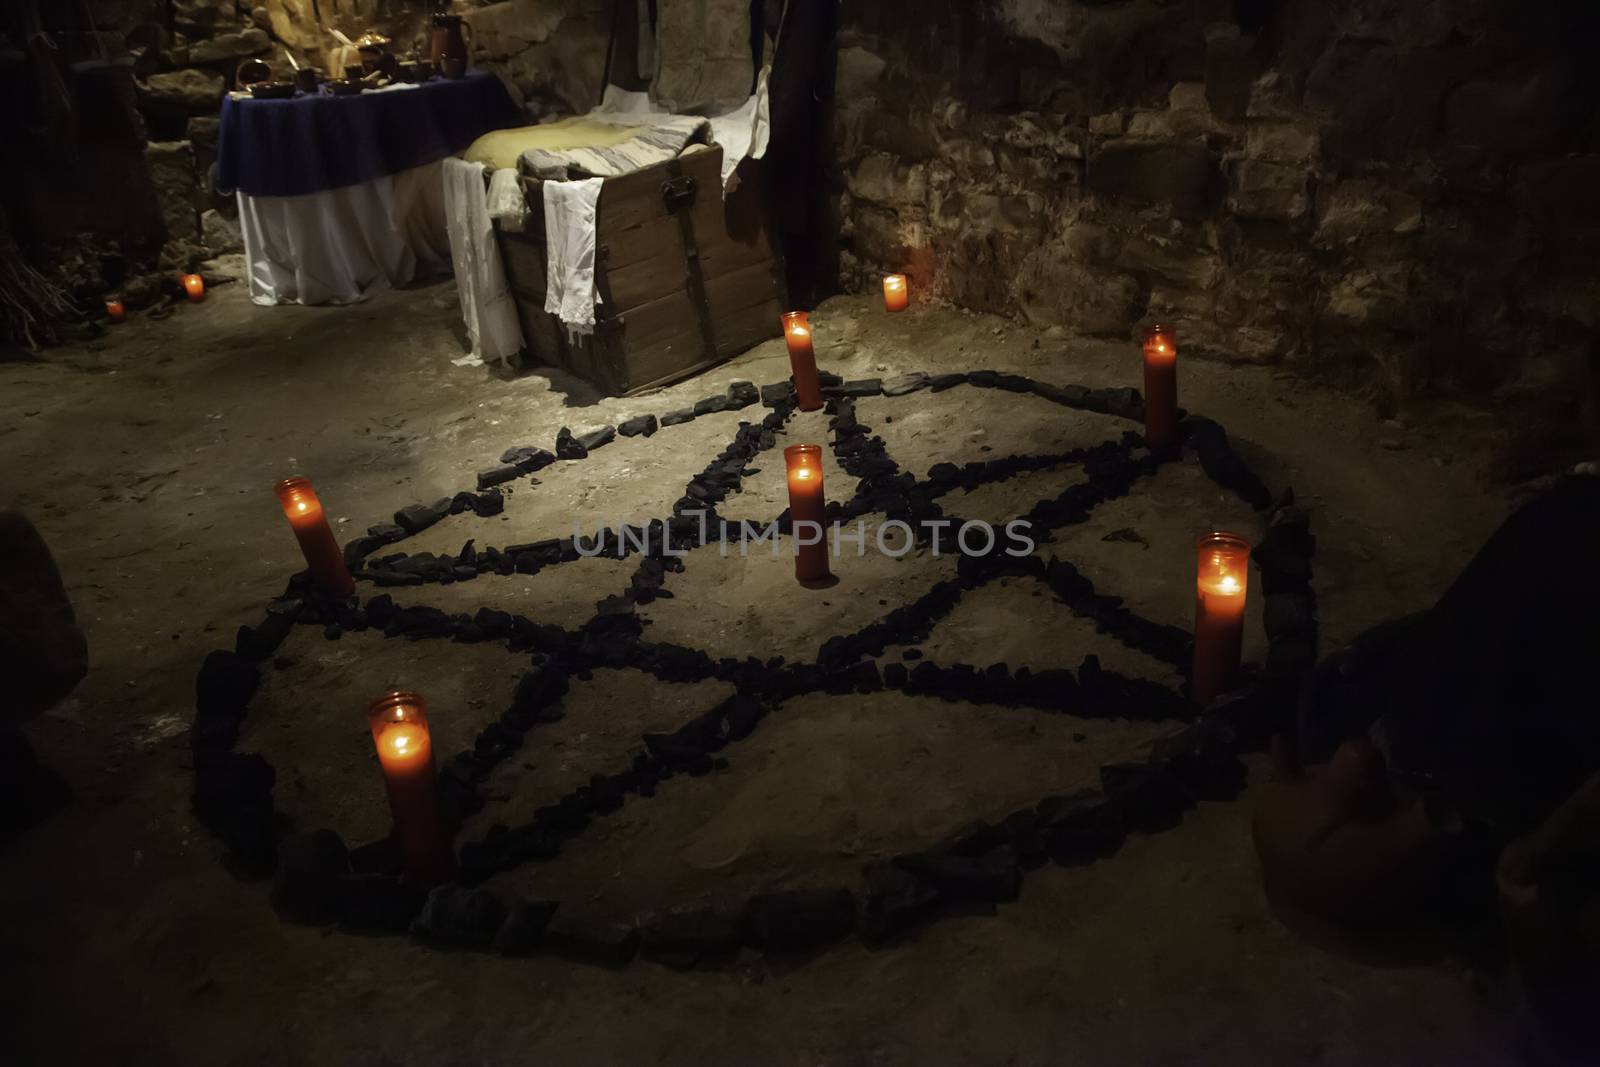 Satanic pentacle with lighted candles, dark magic ritual detail, occultism